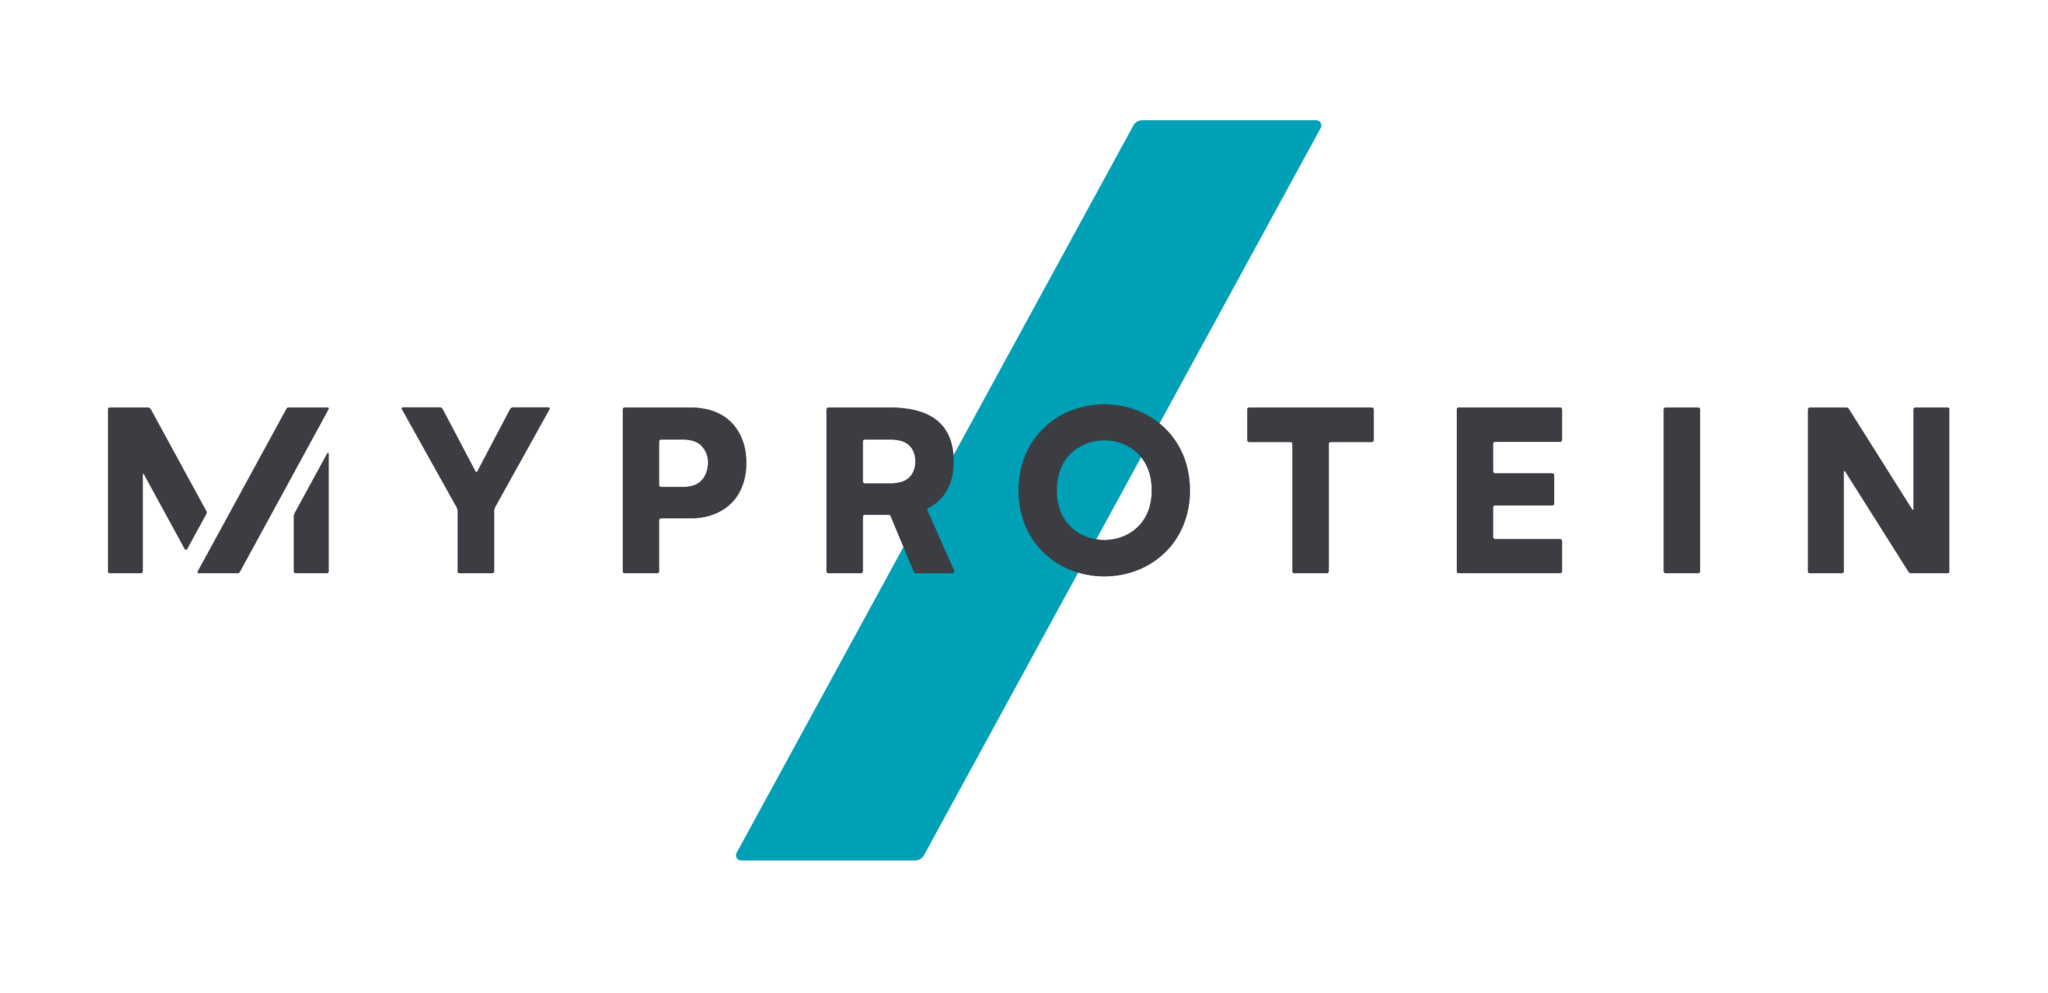 UK’s leading protein brand ‘Myprotein’ enters the Indian market decoding=